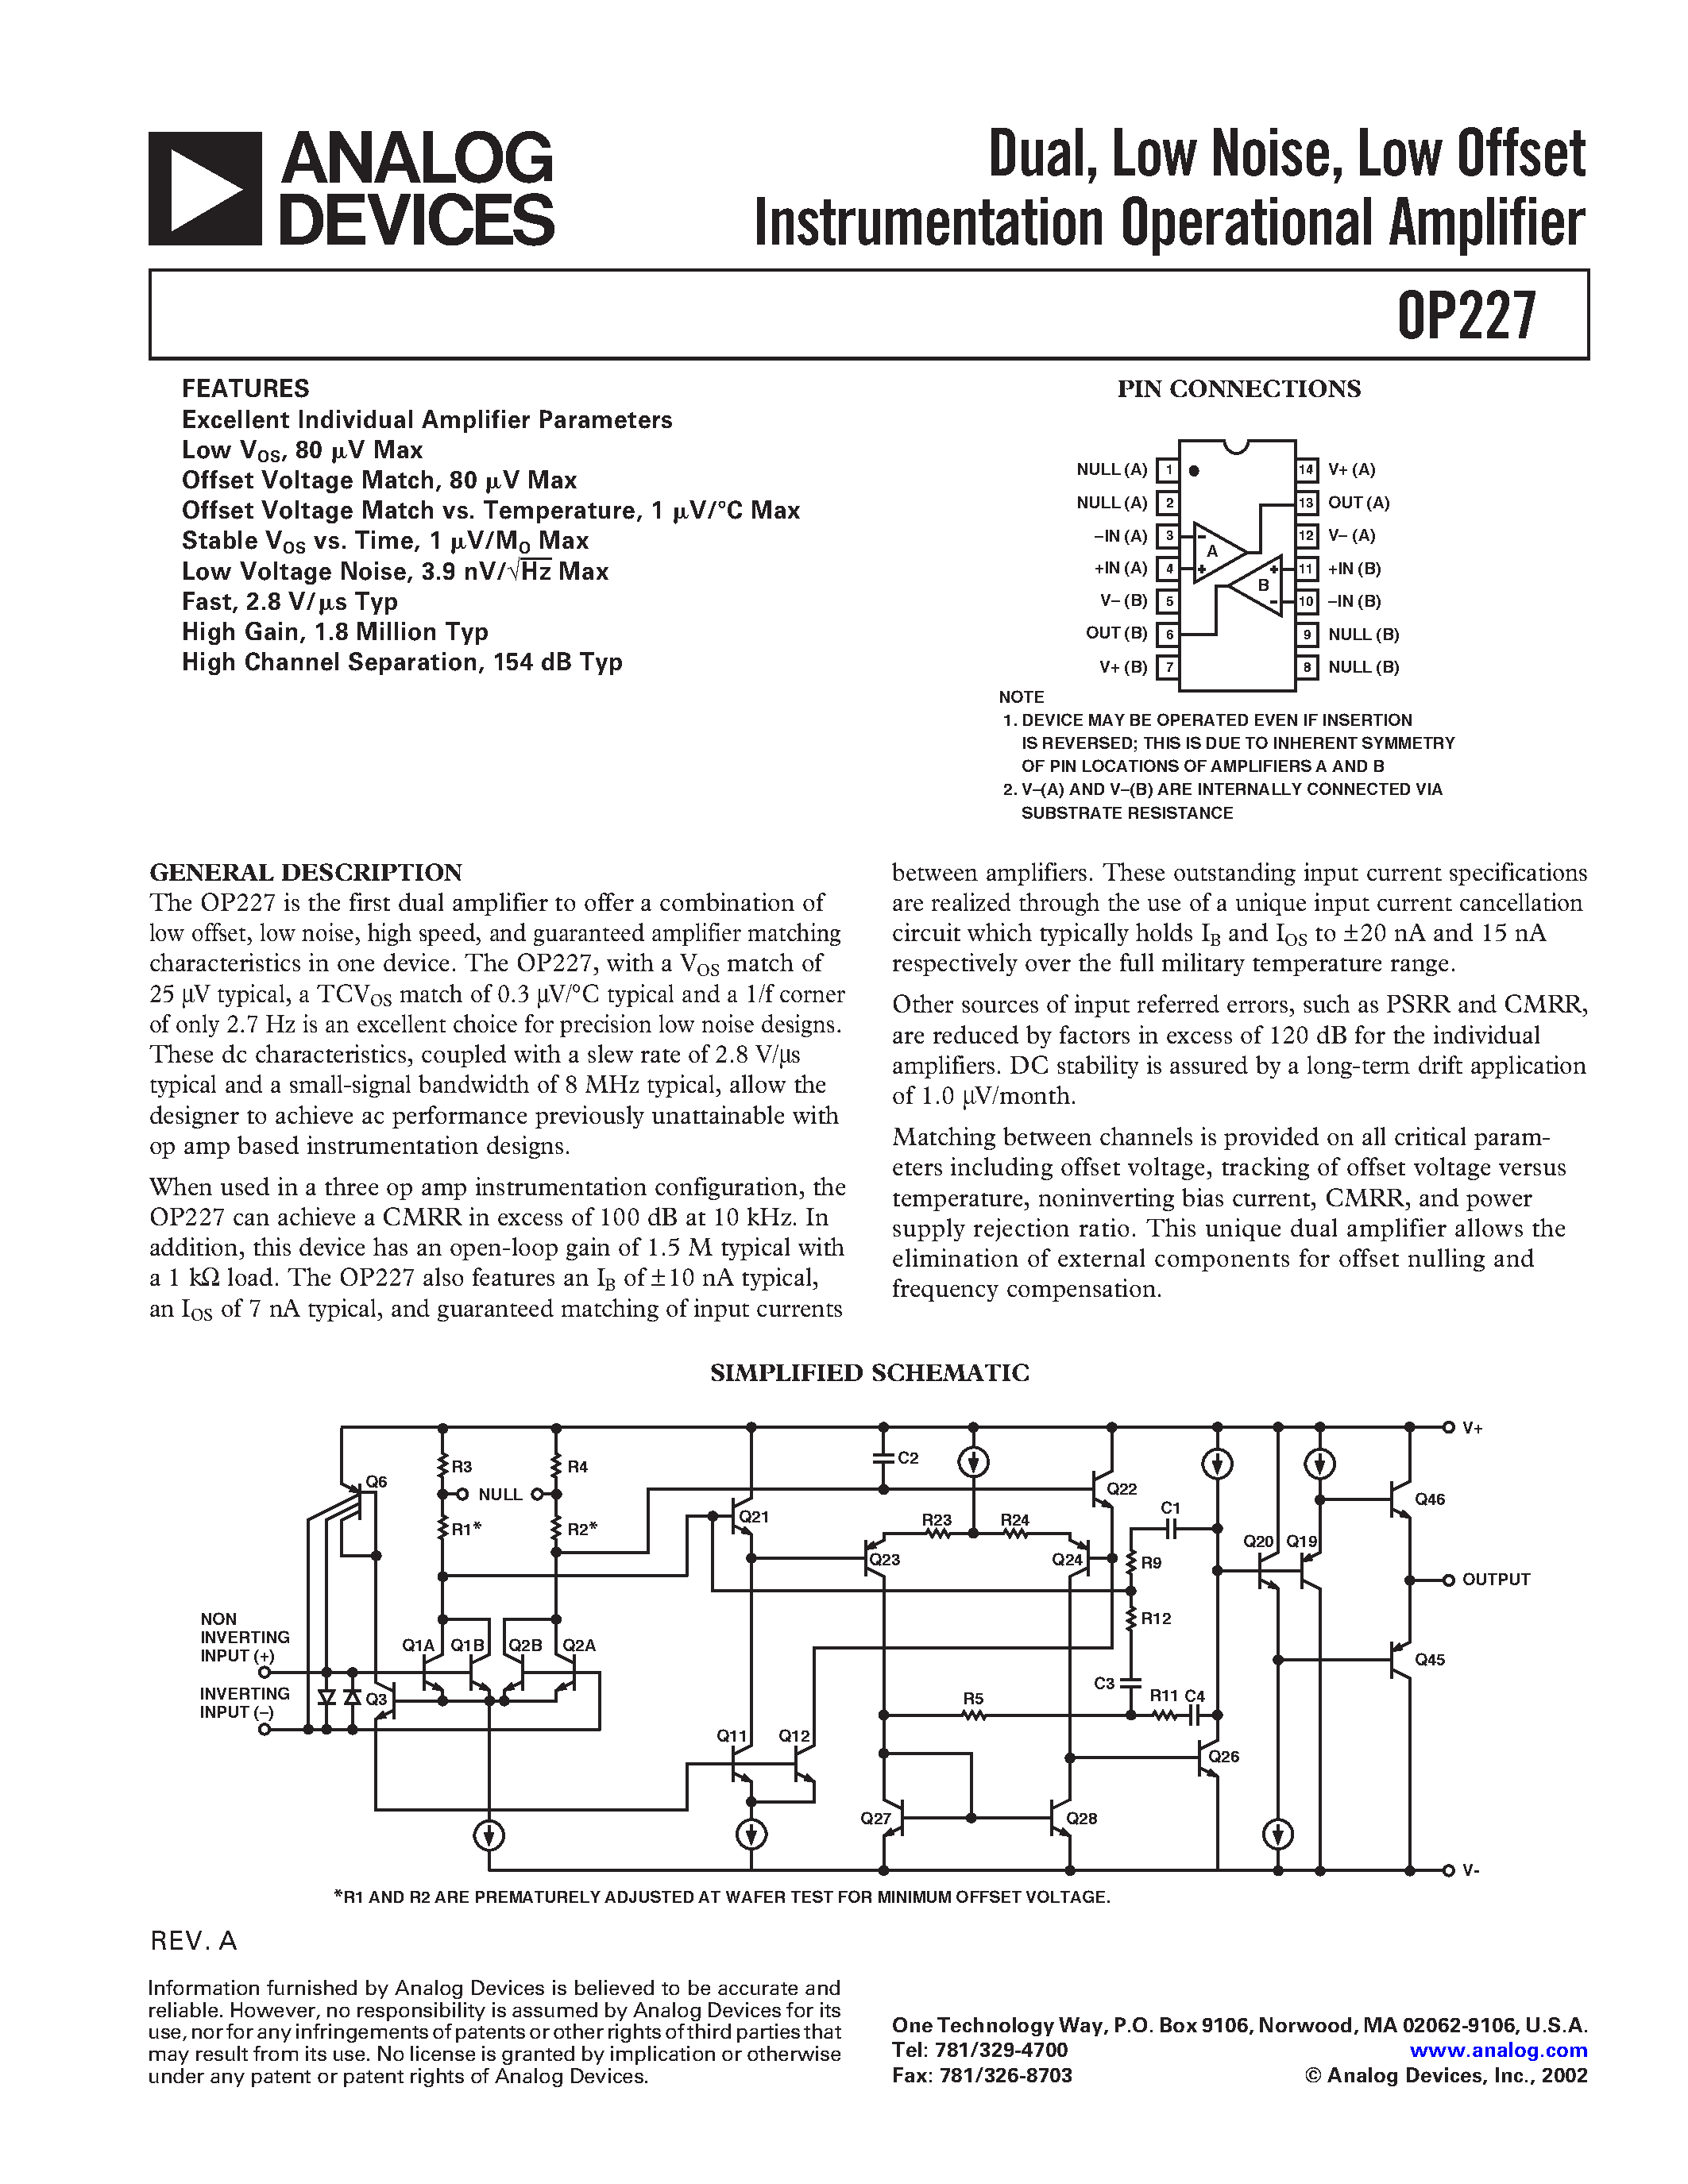 Даташит OP227 - Dual / Low Noise / Low Offset Instrumentation Operational Amplifier страница 1